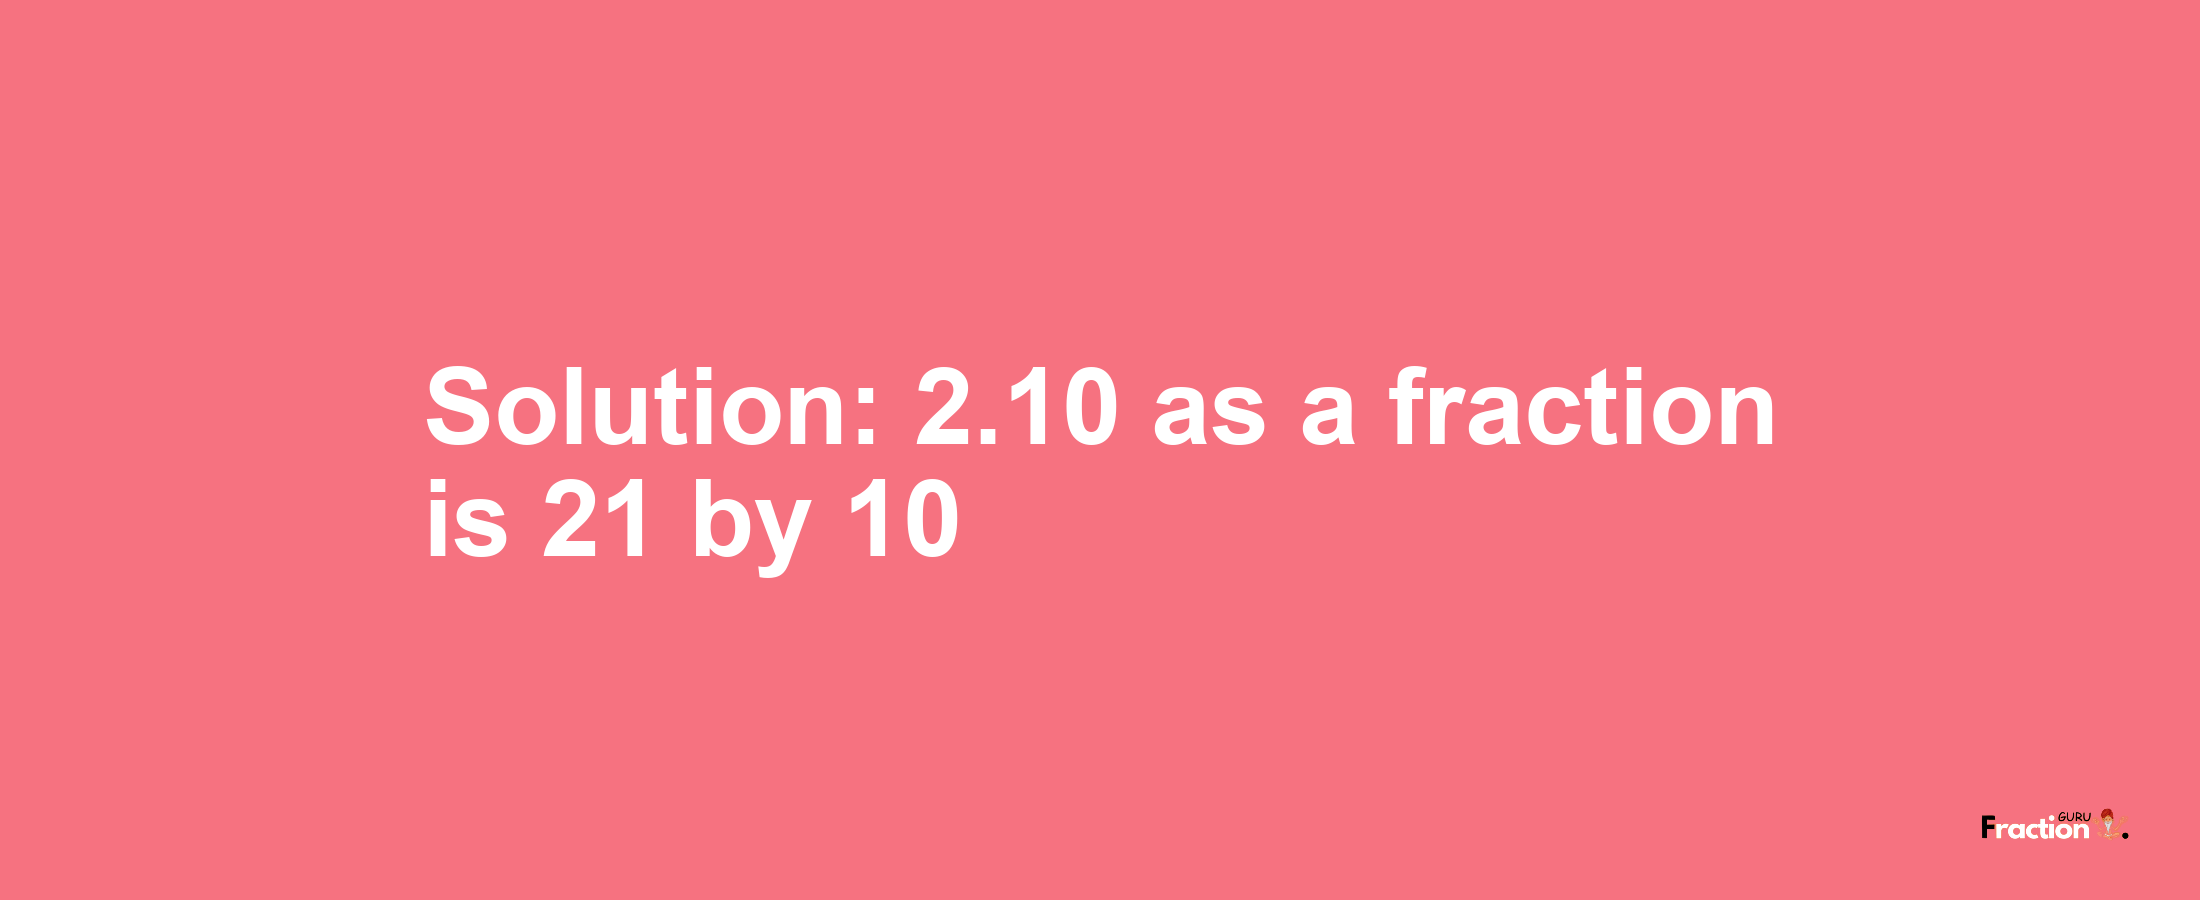 Solution:2.10 as a fraction is 21/10